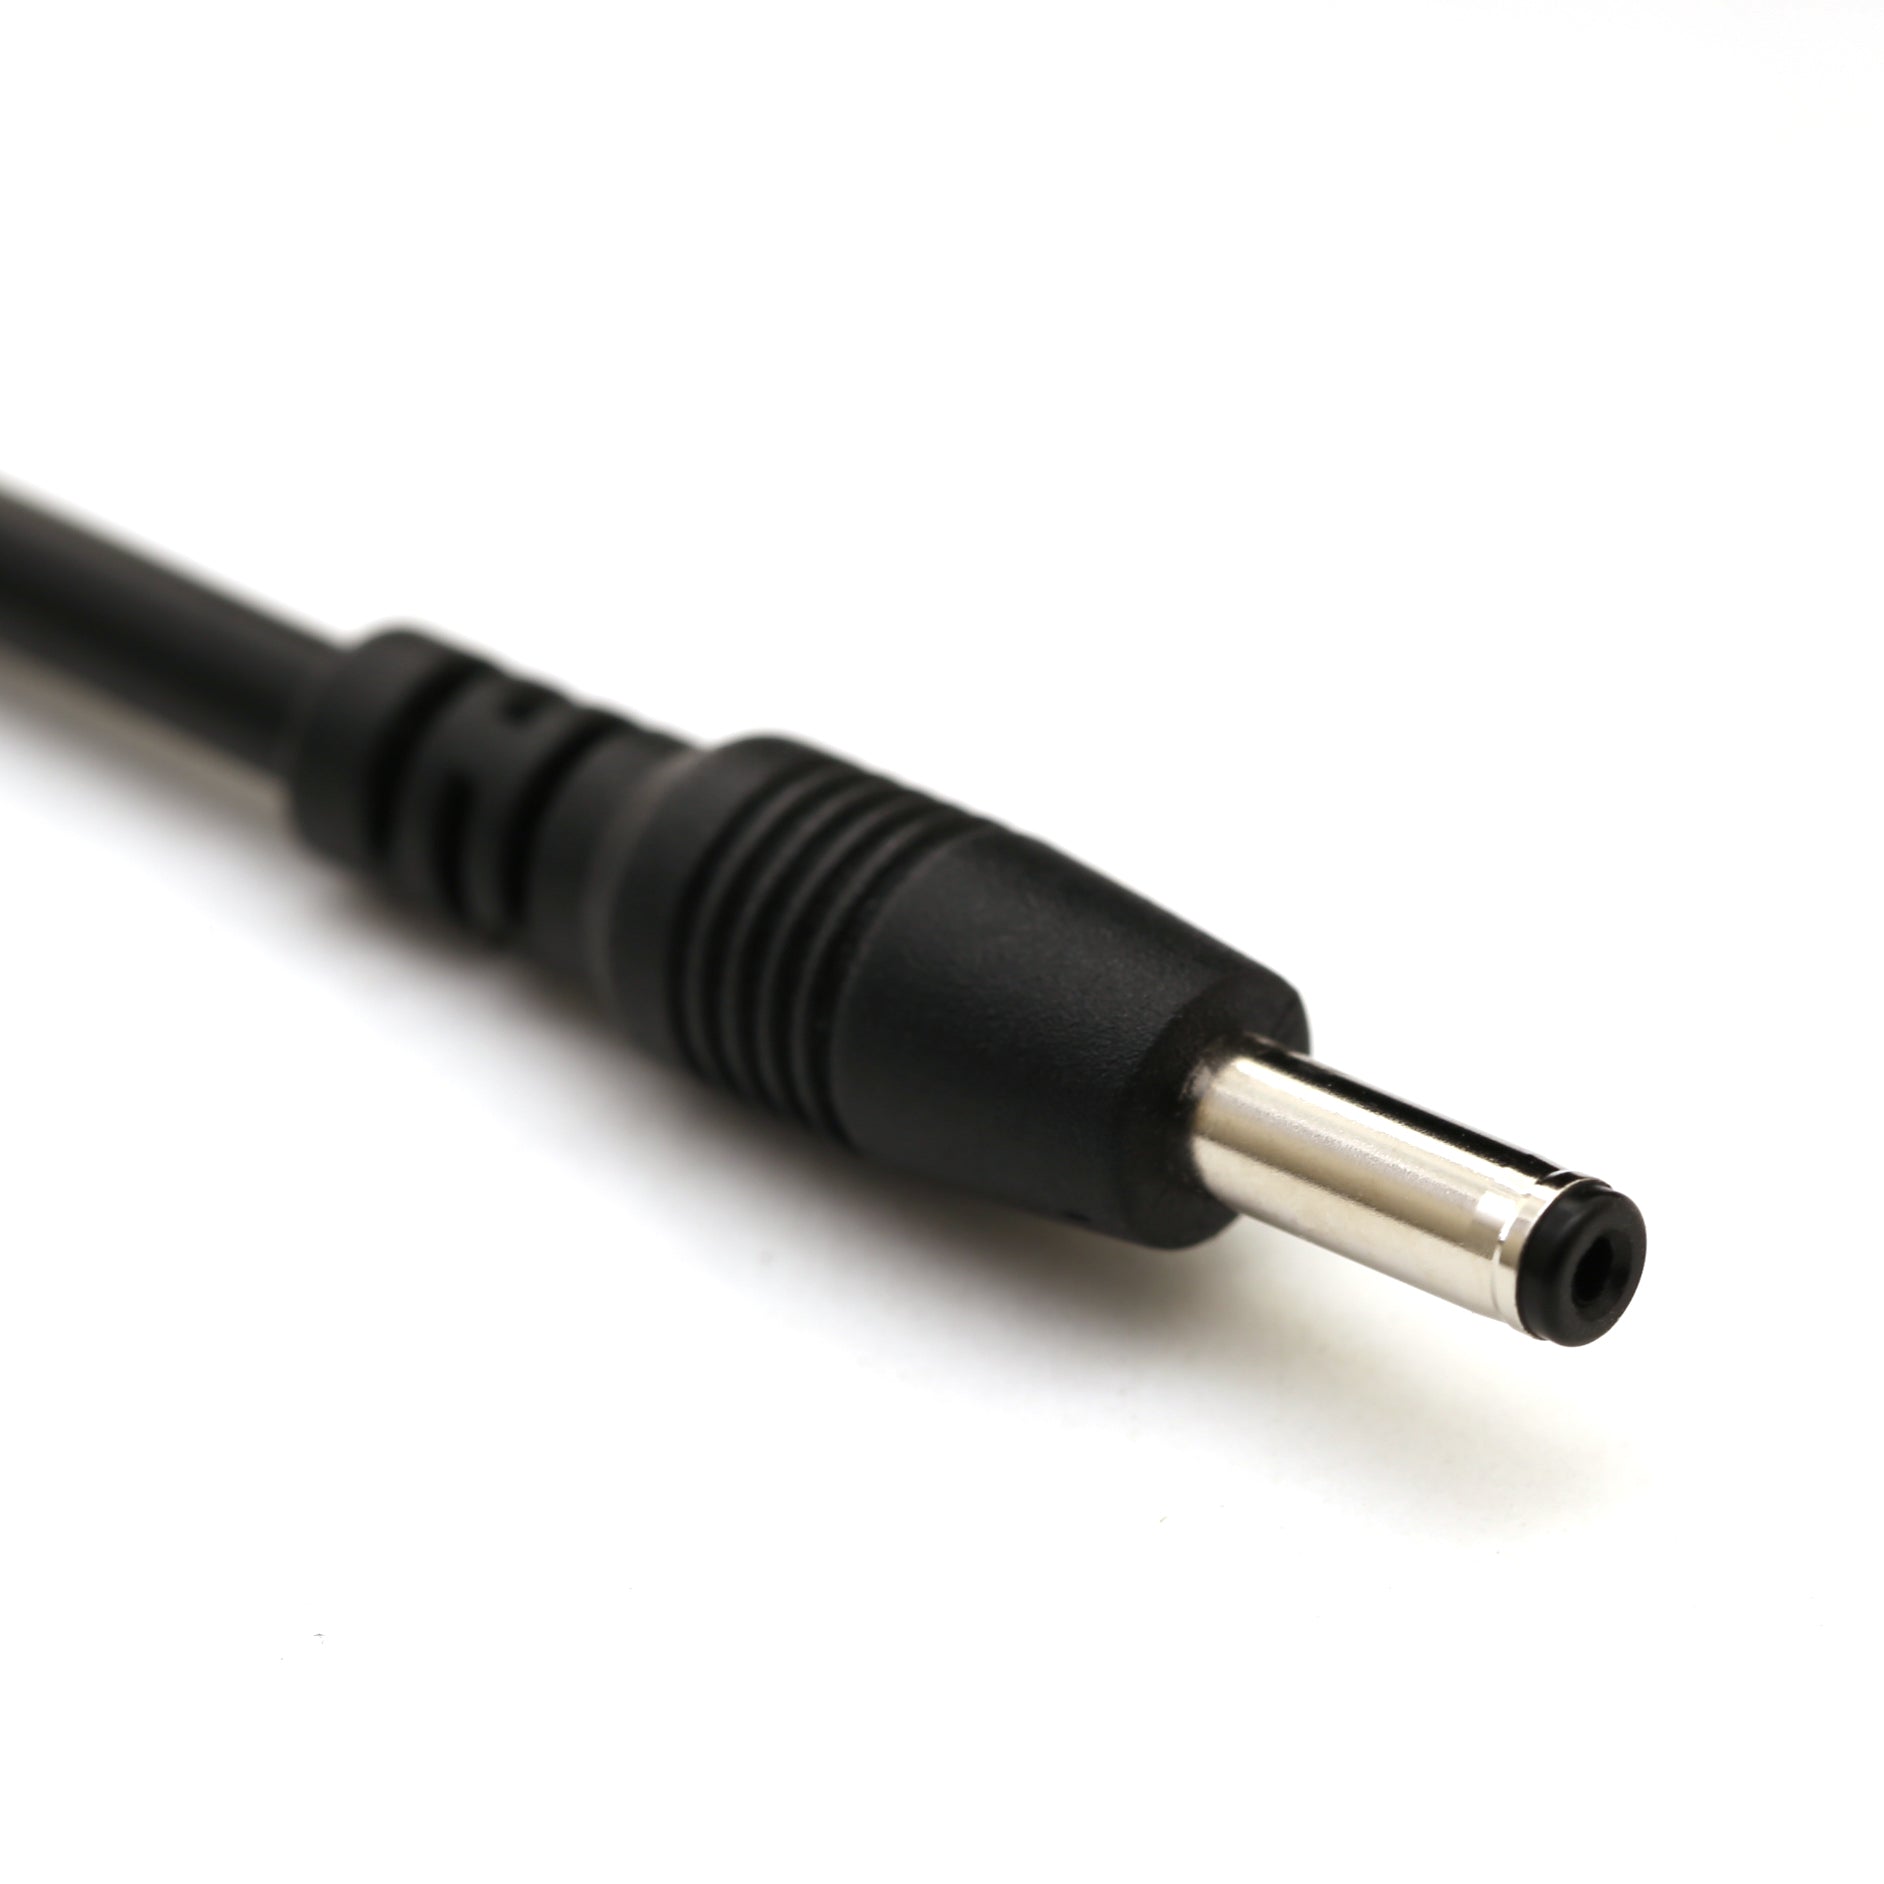 6ft In-Wall Rated Interconnect Cable for Modular LED Under Cabinet Lighting (Black)